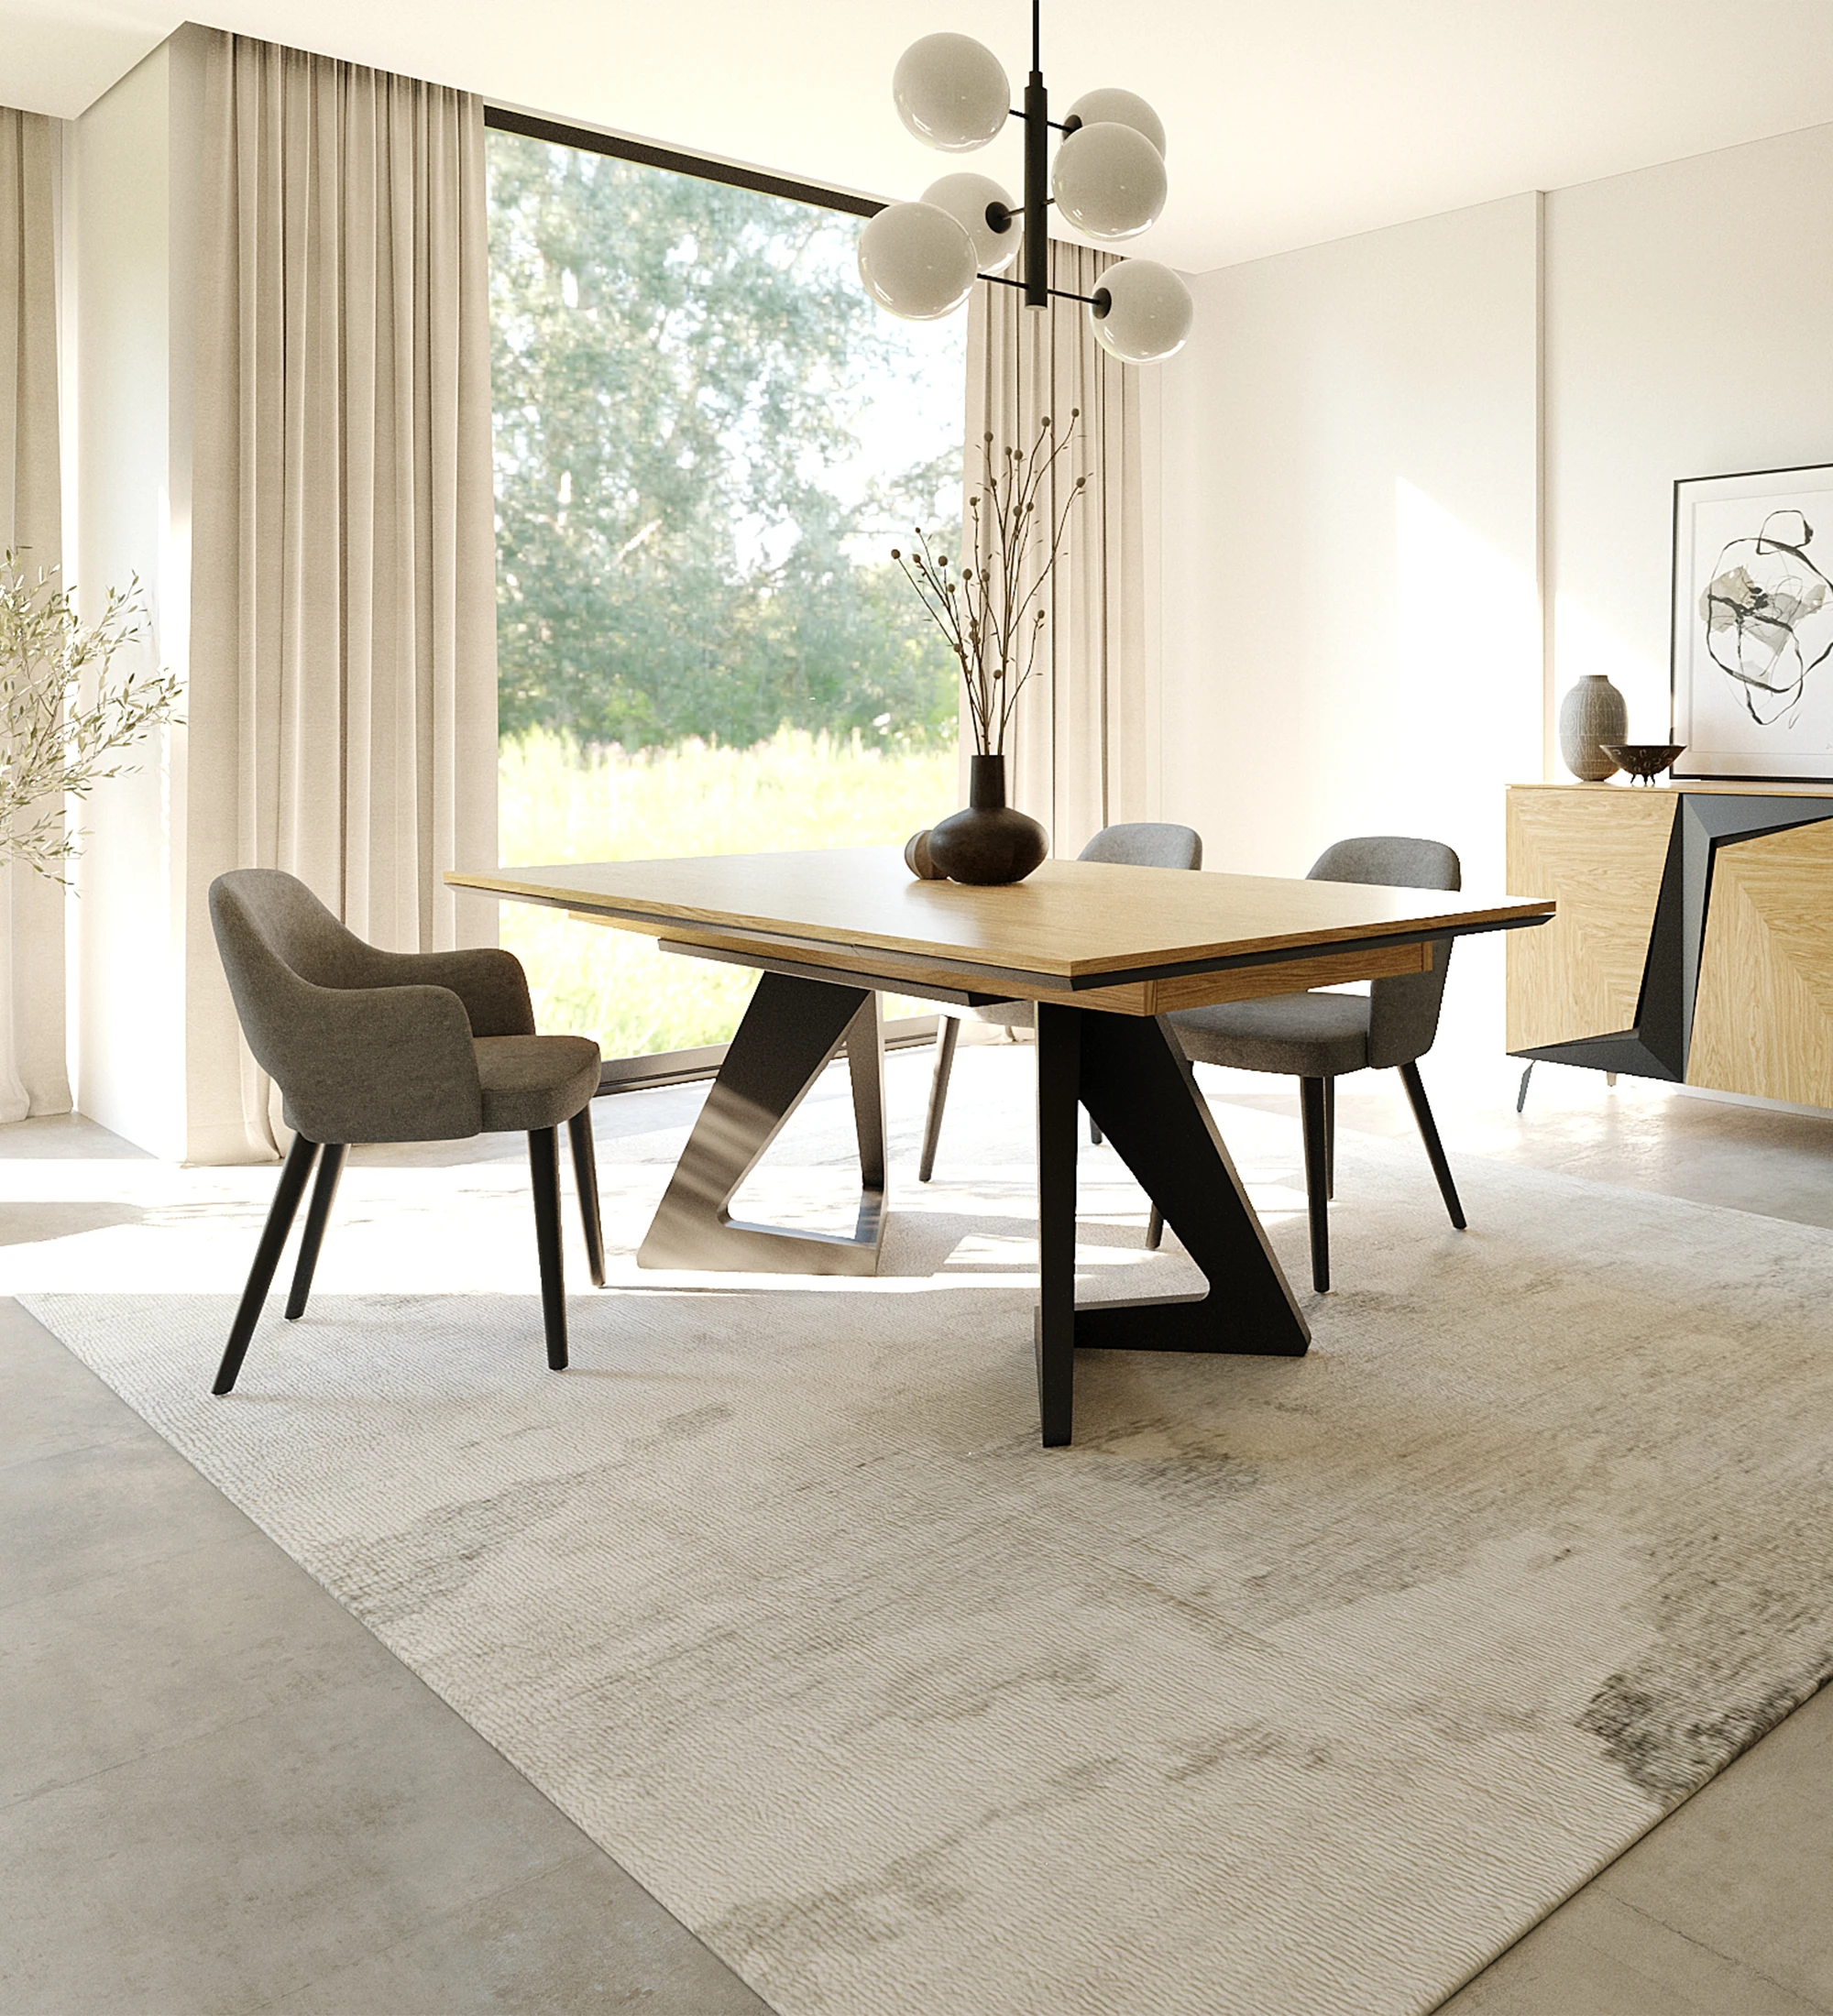 Évora extendable dining table in natural oak and black lacquered metal base.